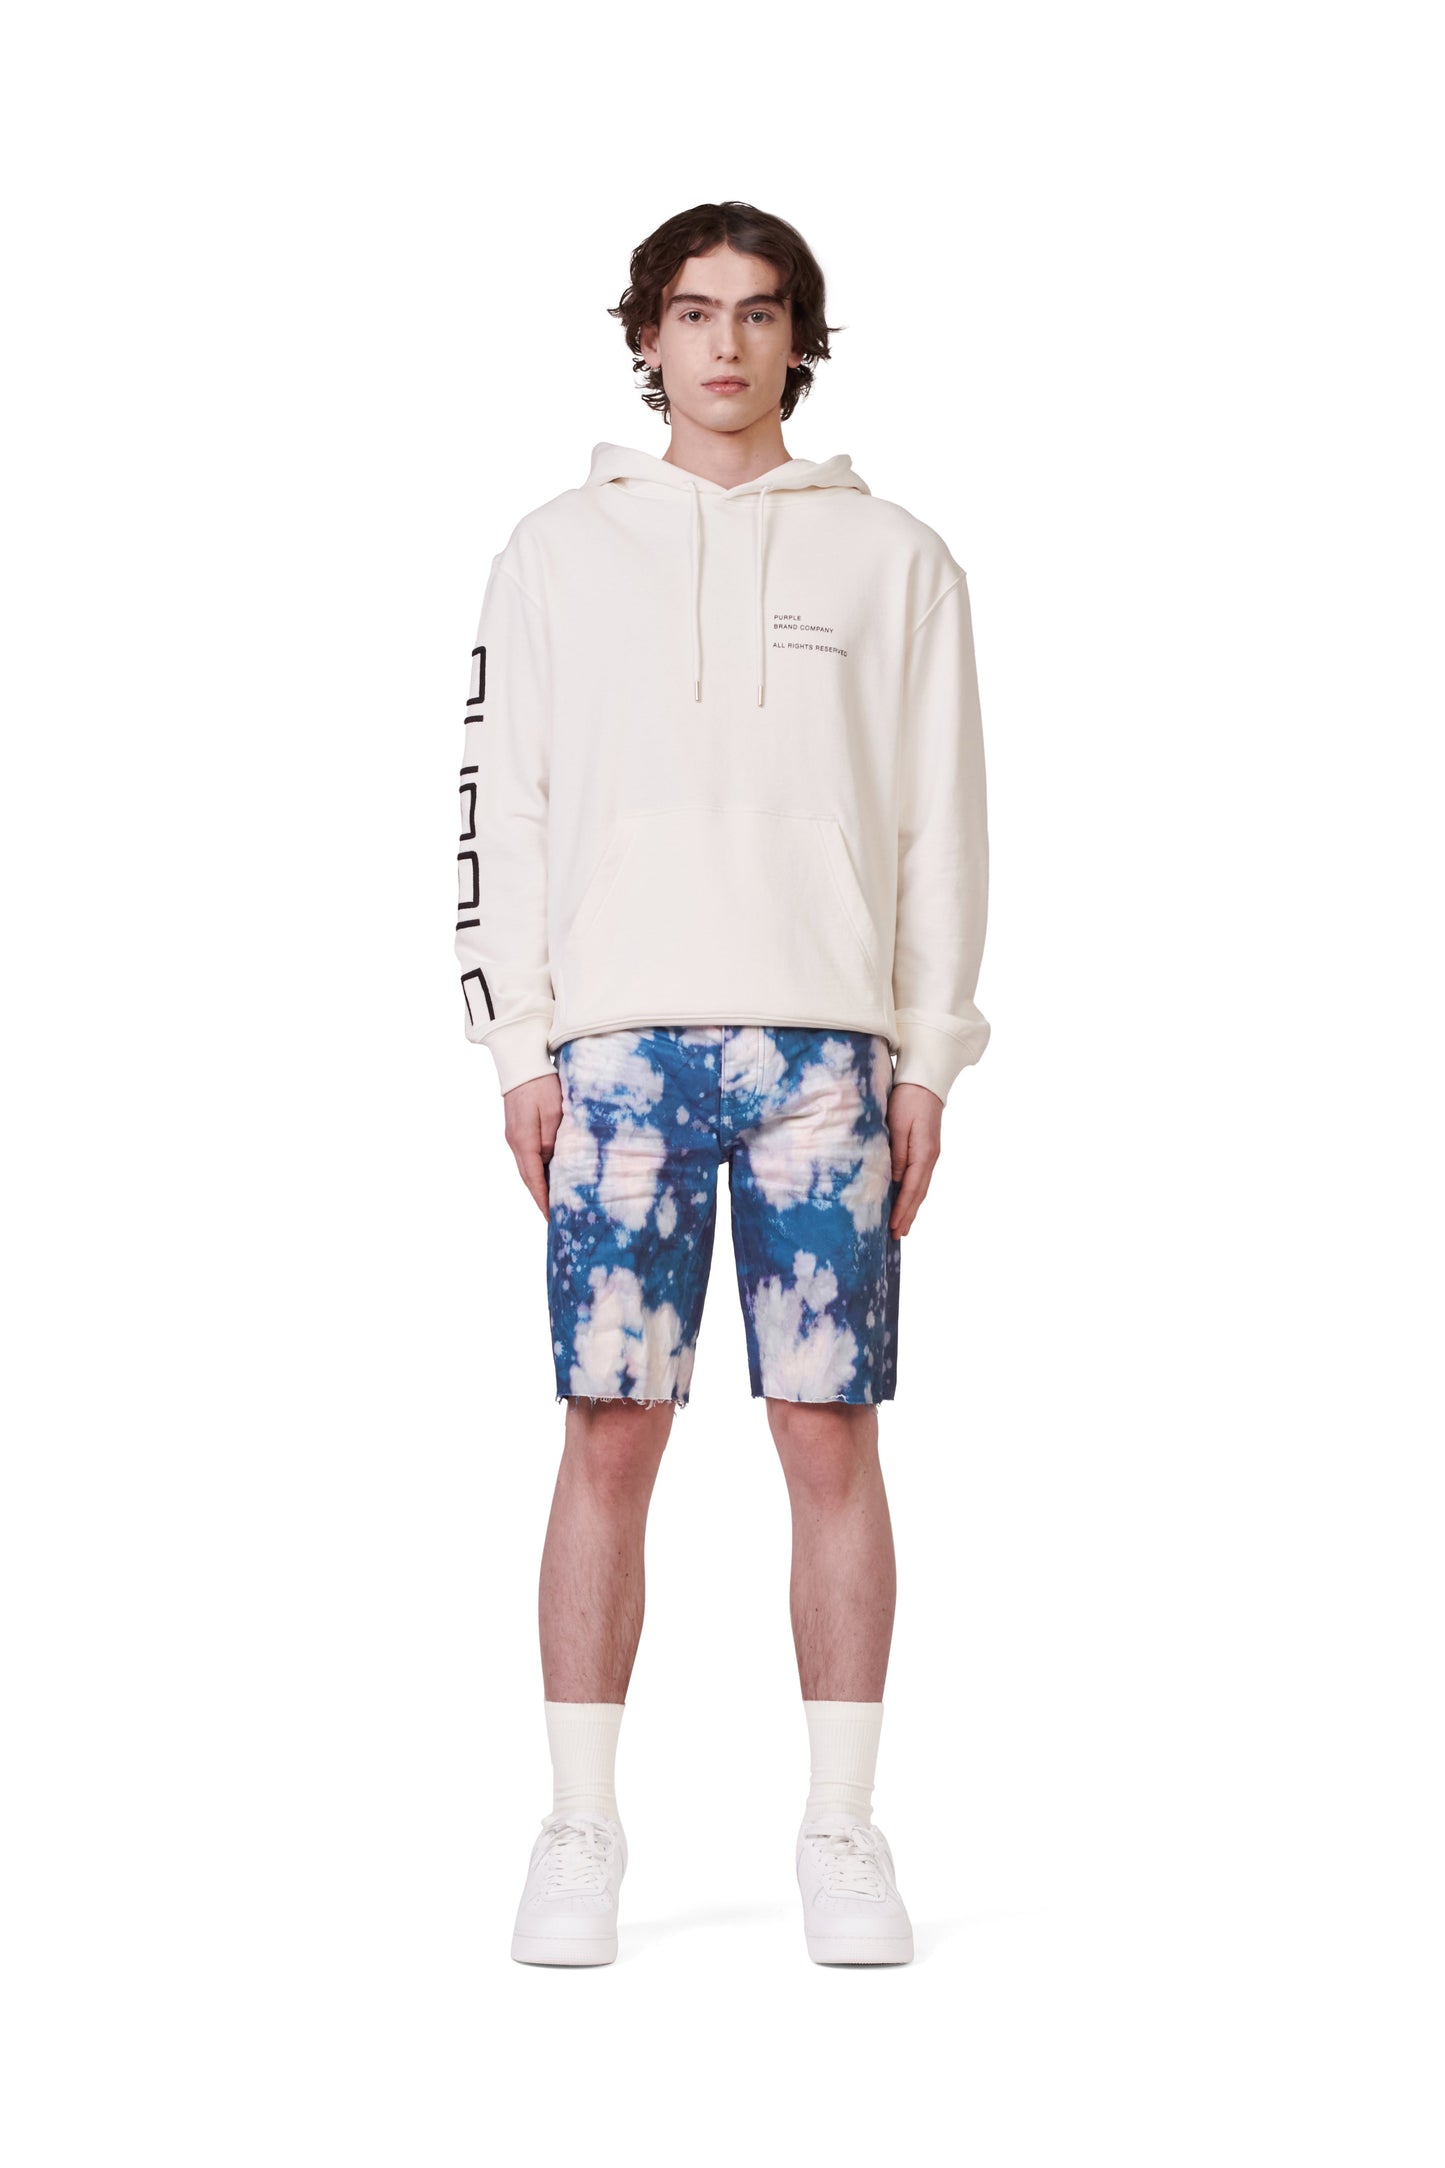 P020 MID RISE SHORT - Blue Dyed Layered Bleach